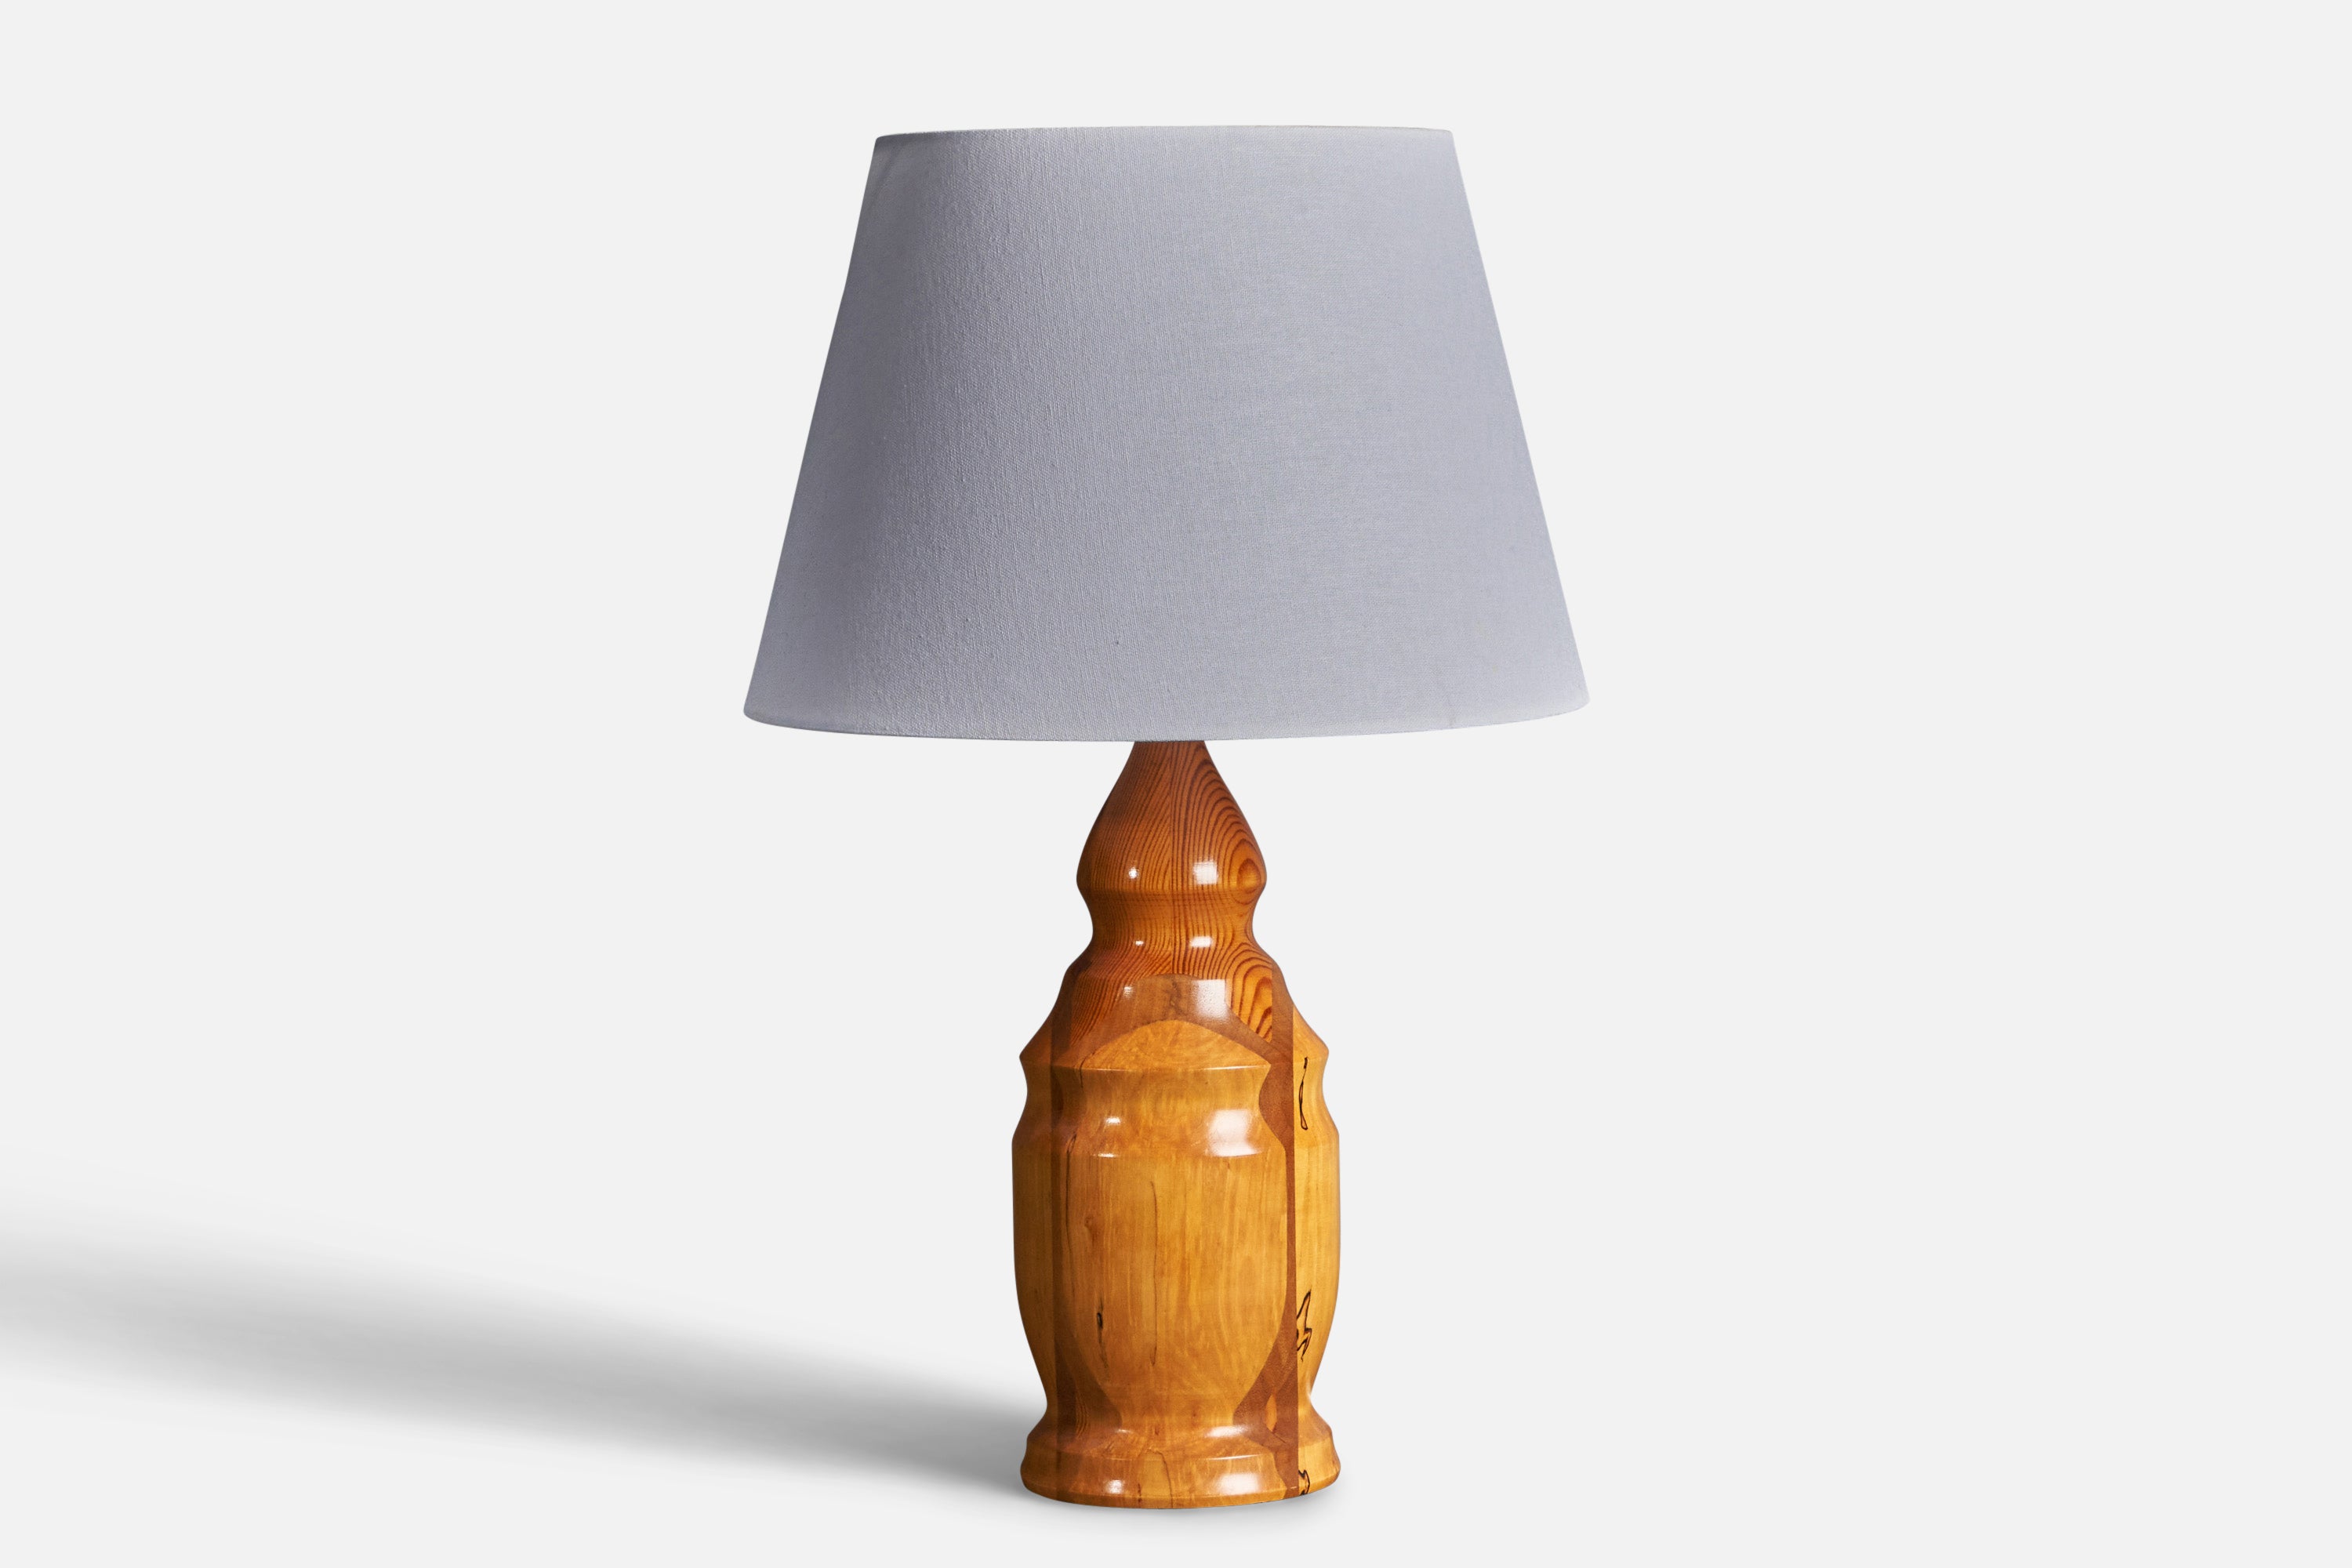 Swedish Craftsman, Table Lamp, Solid Joined Pine, Birch, Mahogany, Sweden, 1985 For Sale